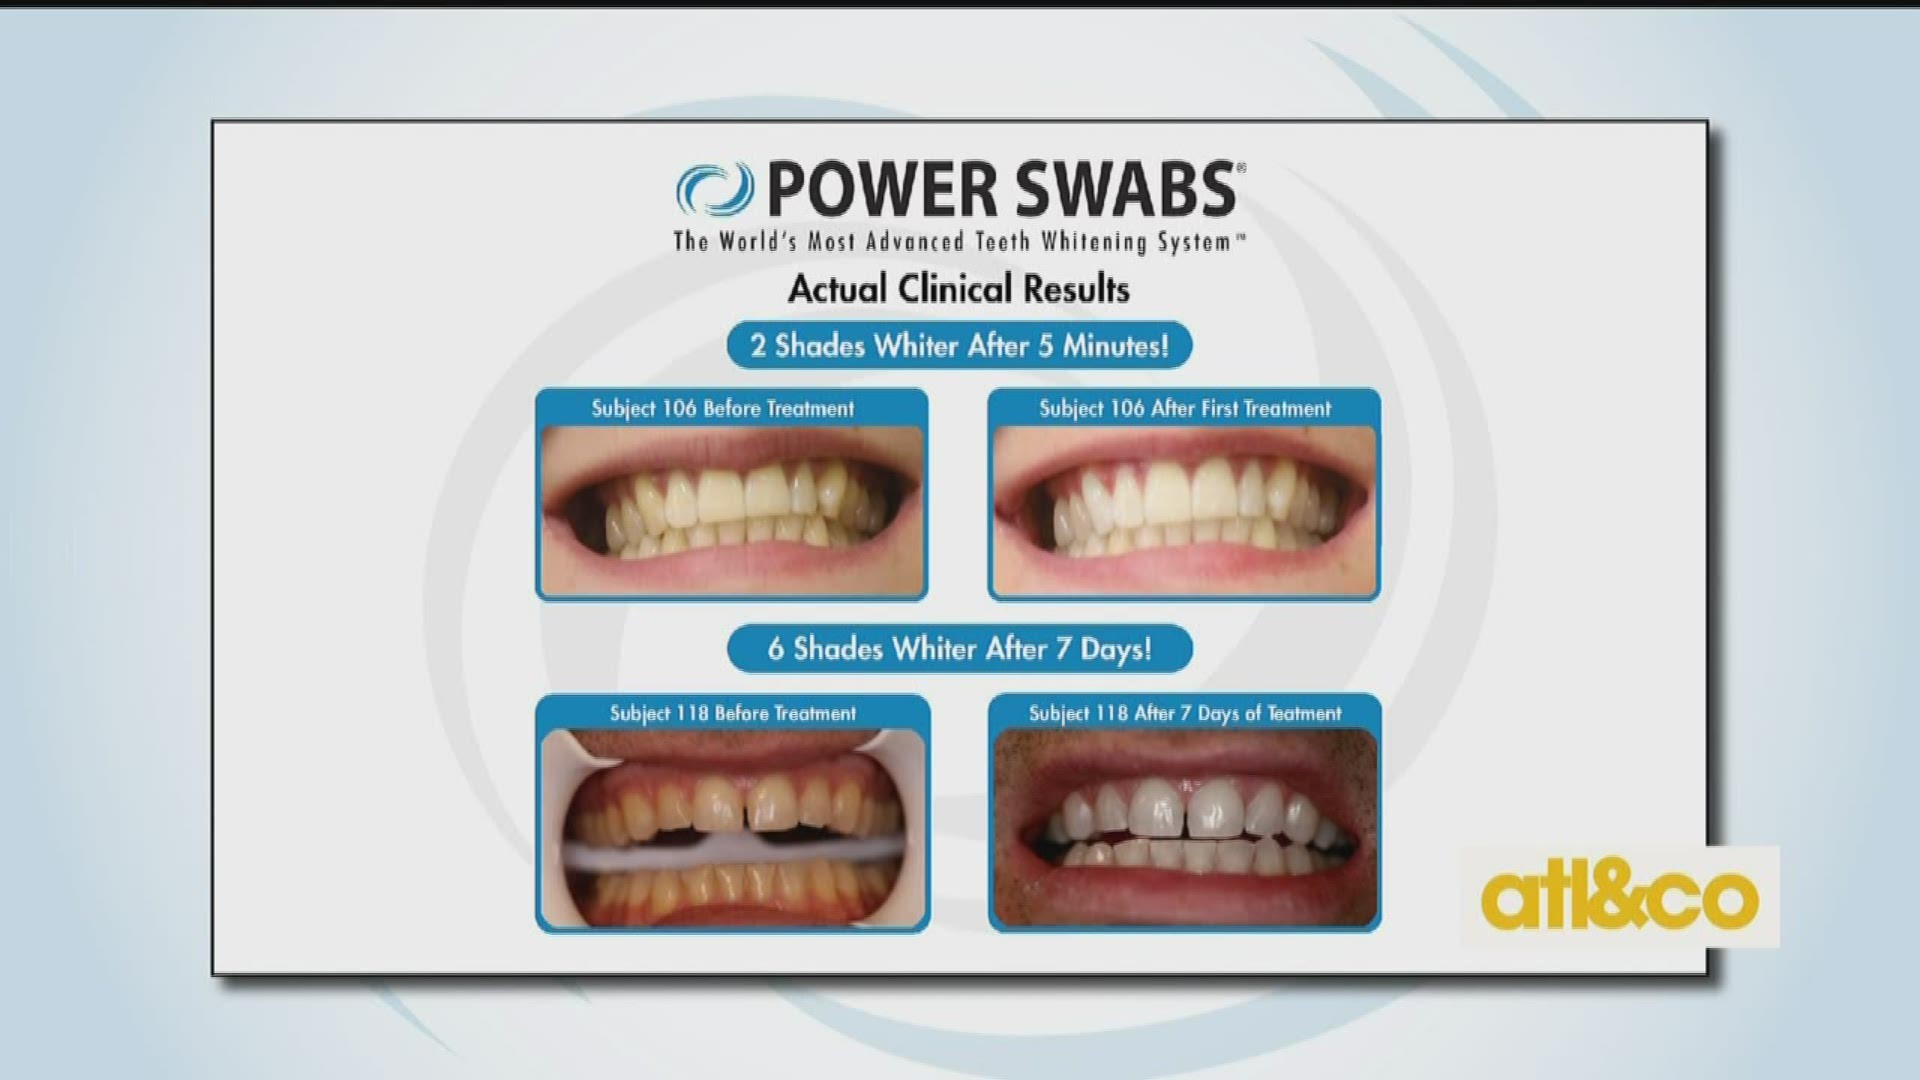 Get a special offer from Power Swabs and whiten your teeth today!